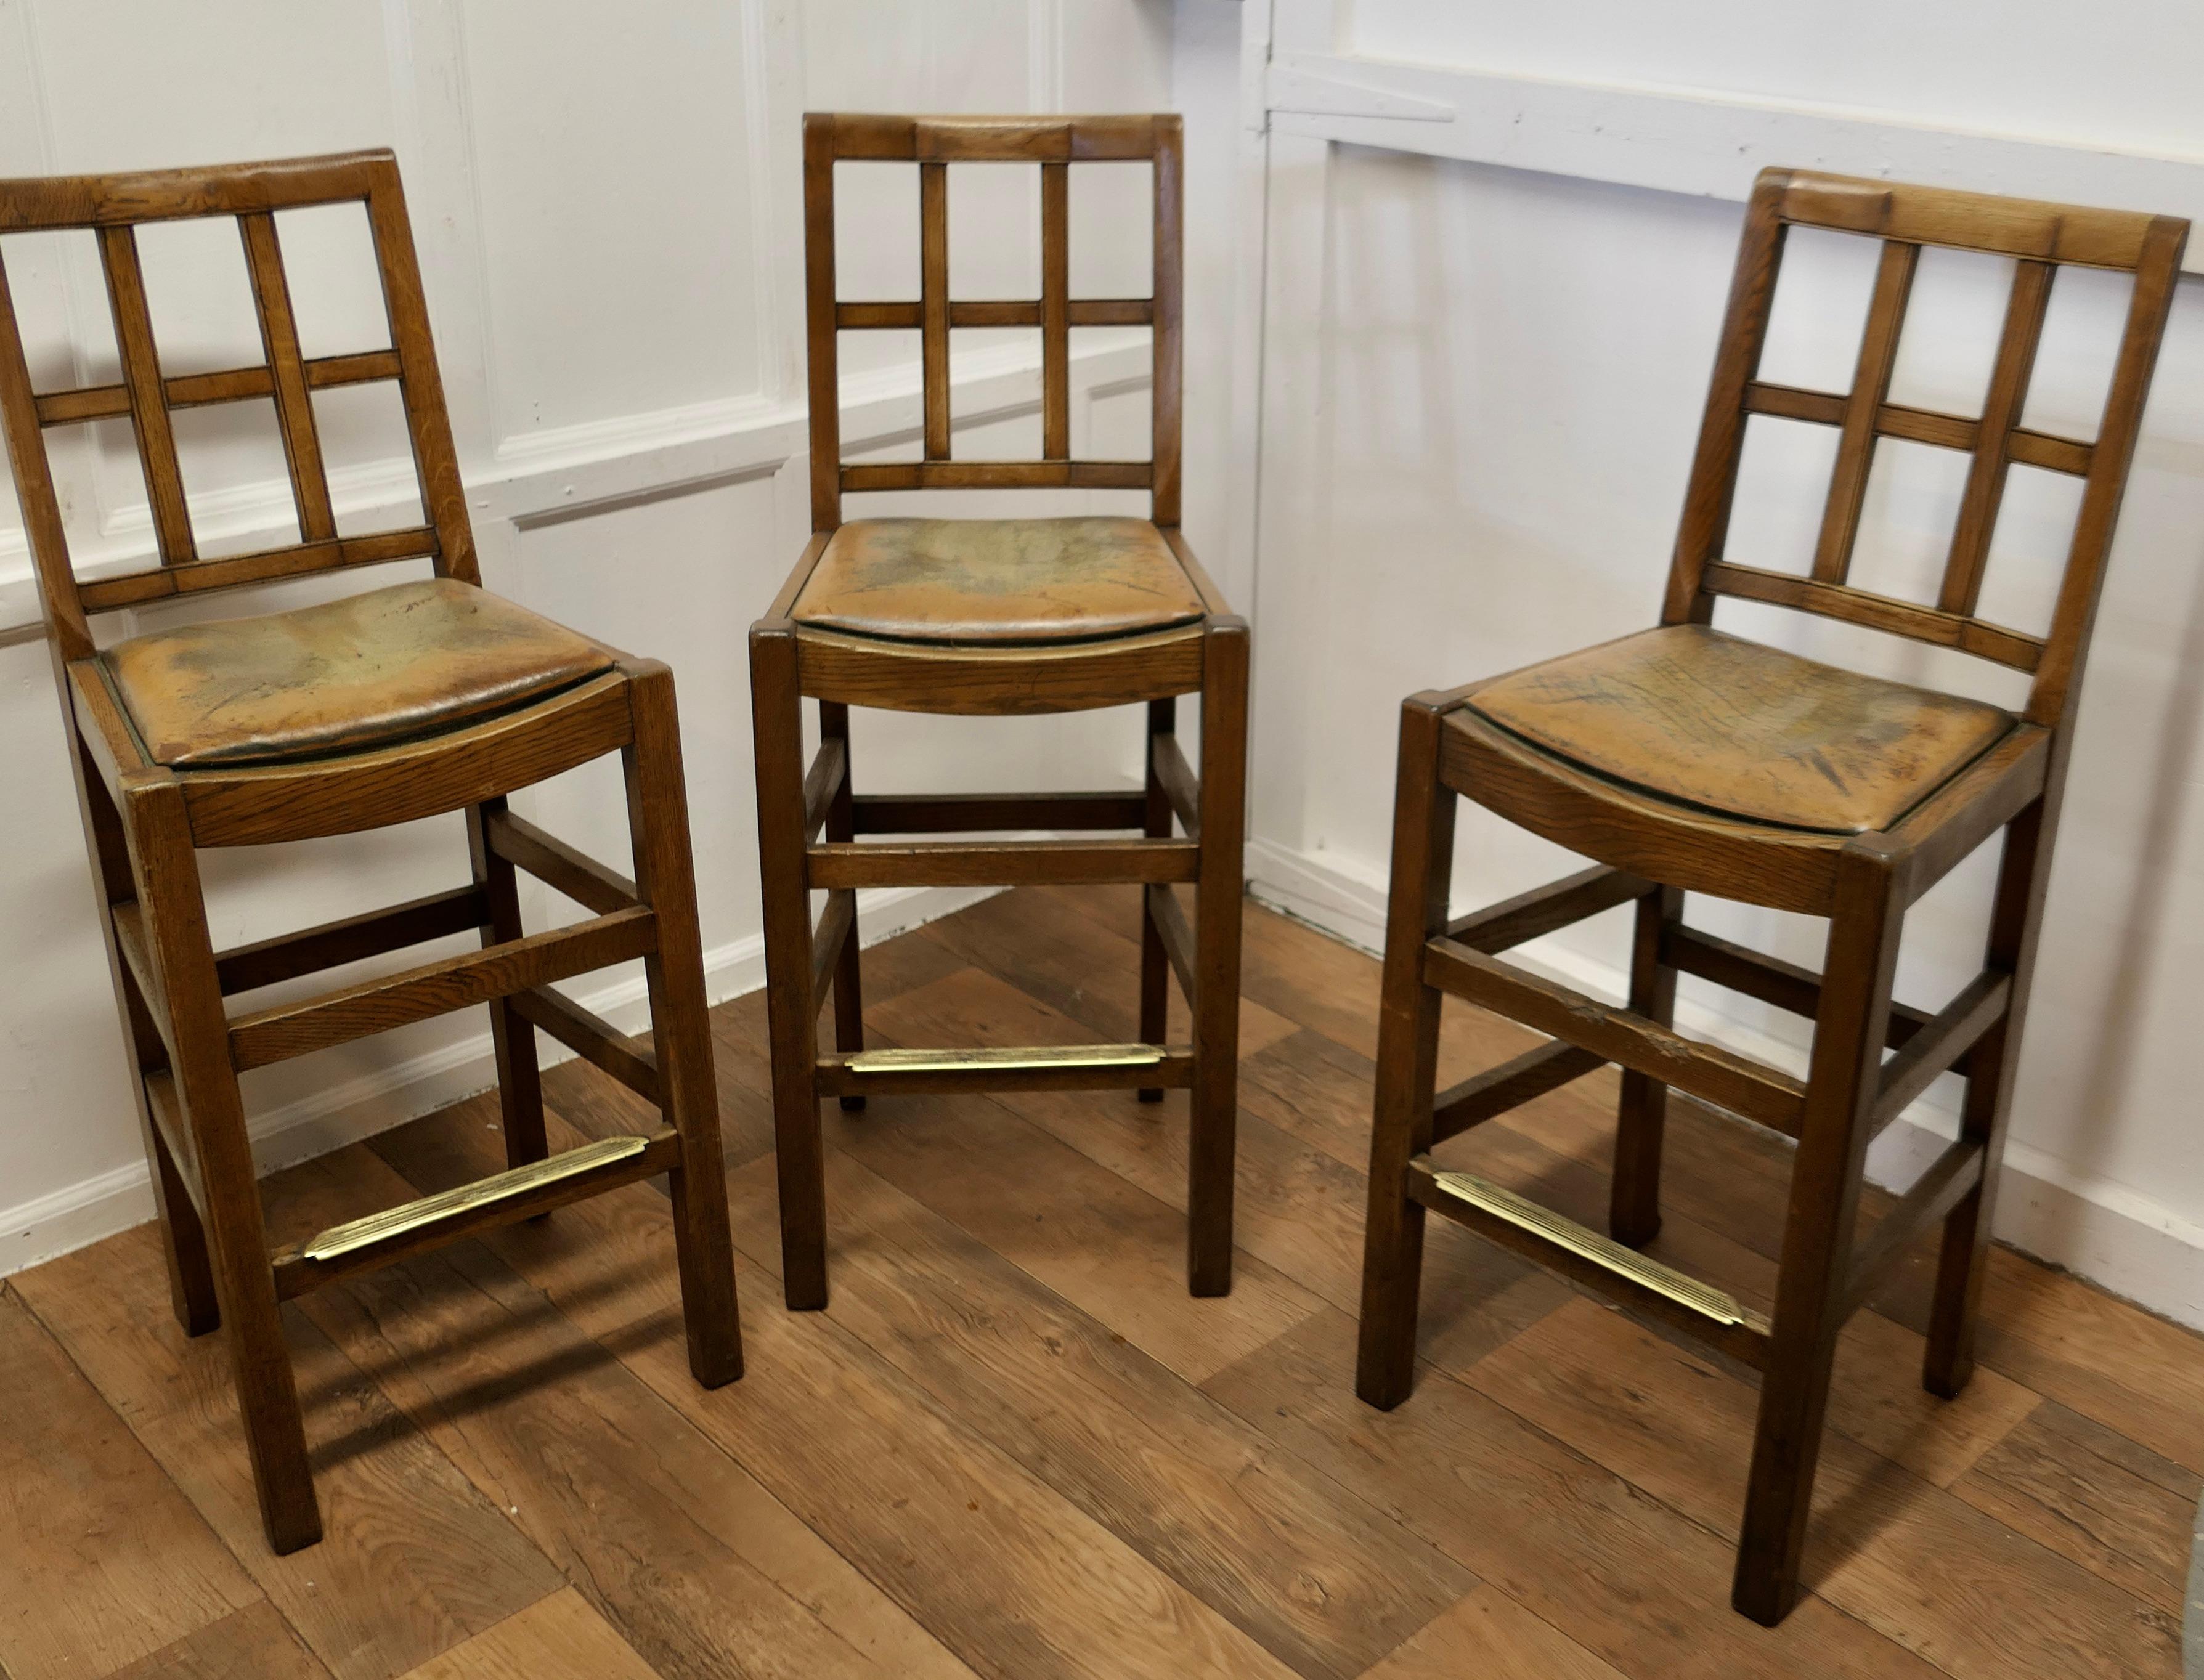 A Rare Trio of Arts and Crafts High Bar Stools, in Golden Oak   In Good Condition For Sale In Chillerton, Isle of Wight